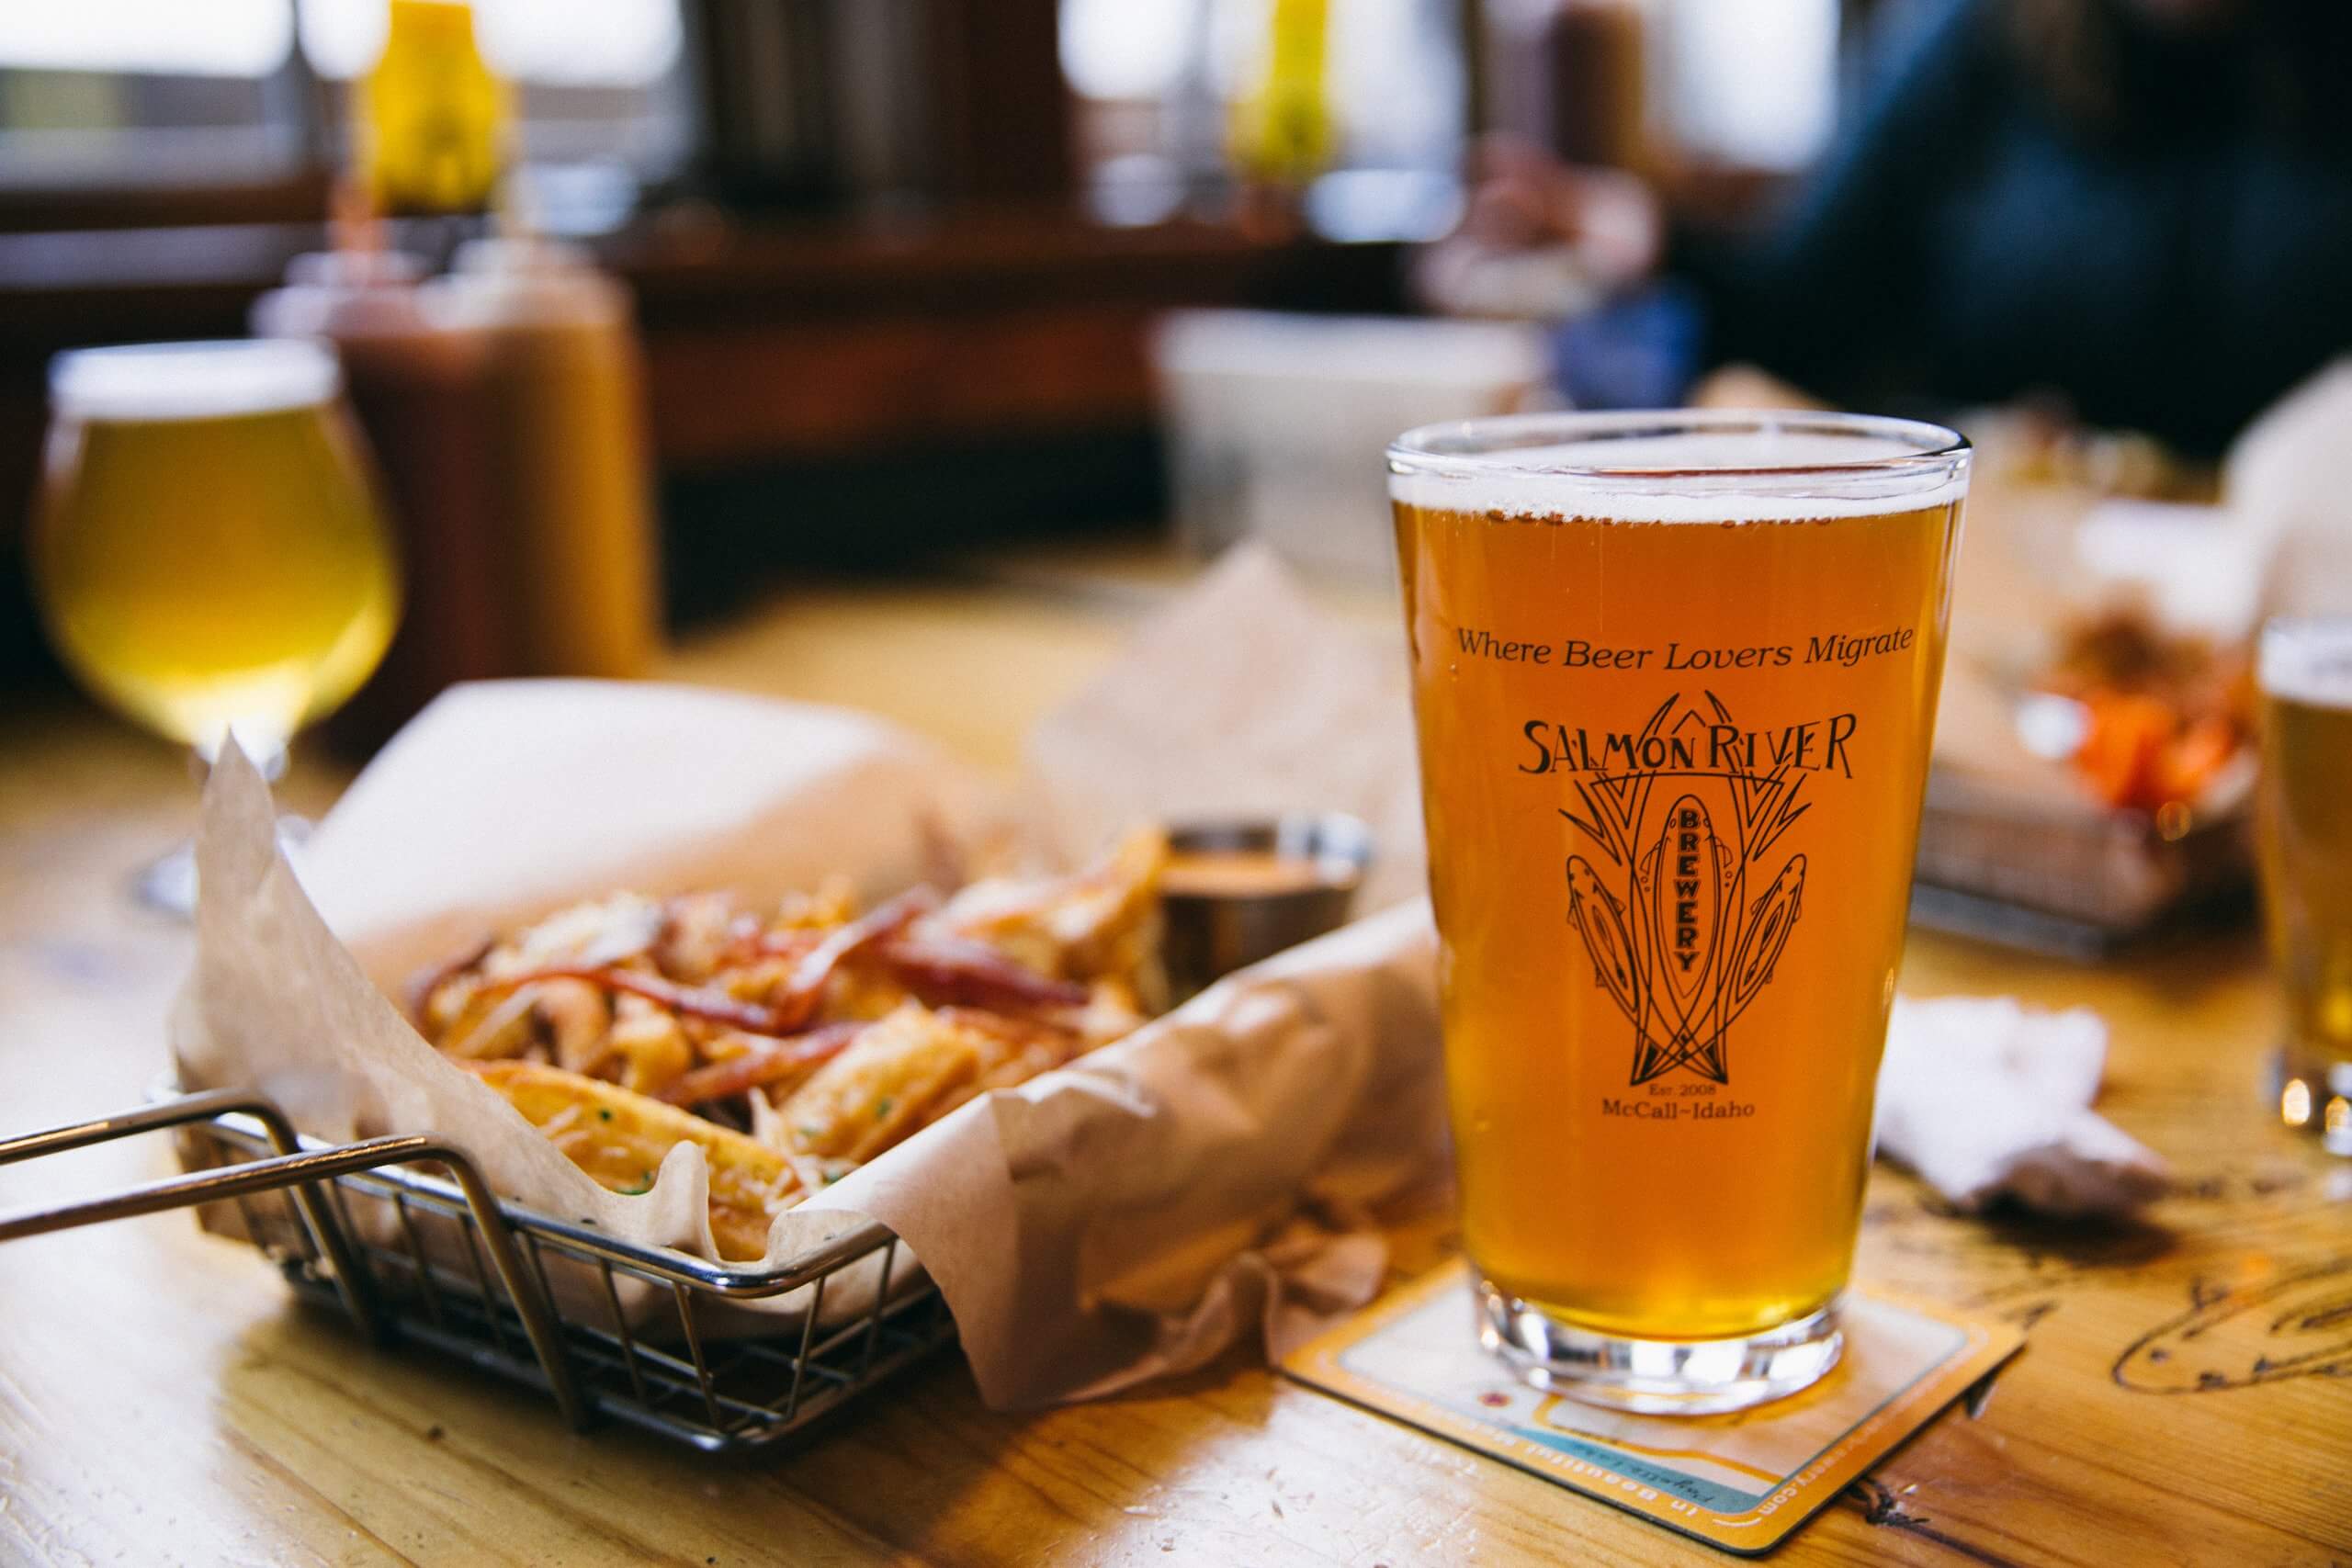 A closeup view of a glass of beer and basket of fries on a table at Salmon River Brewery.